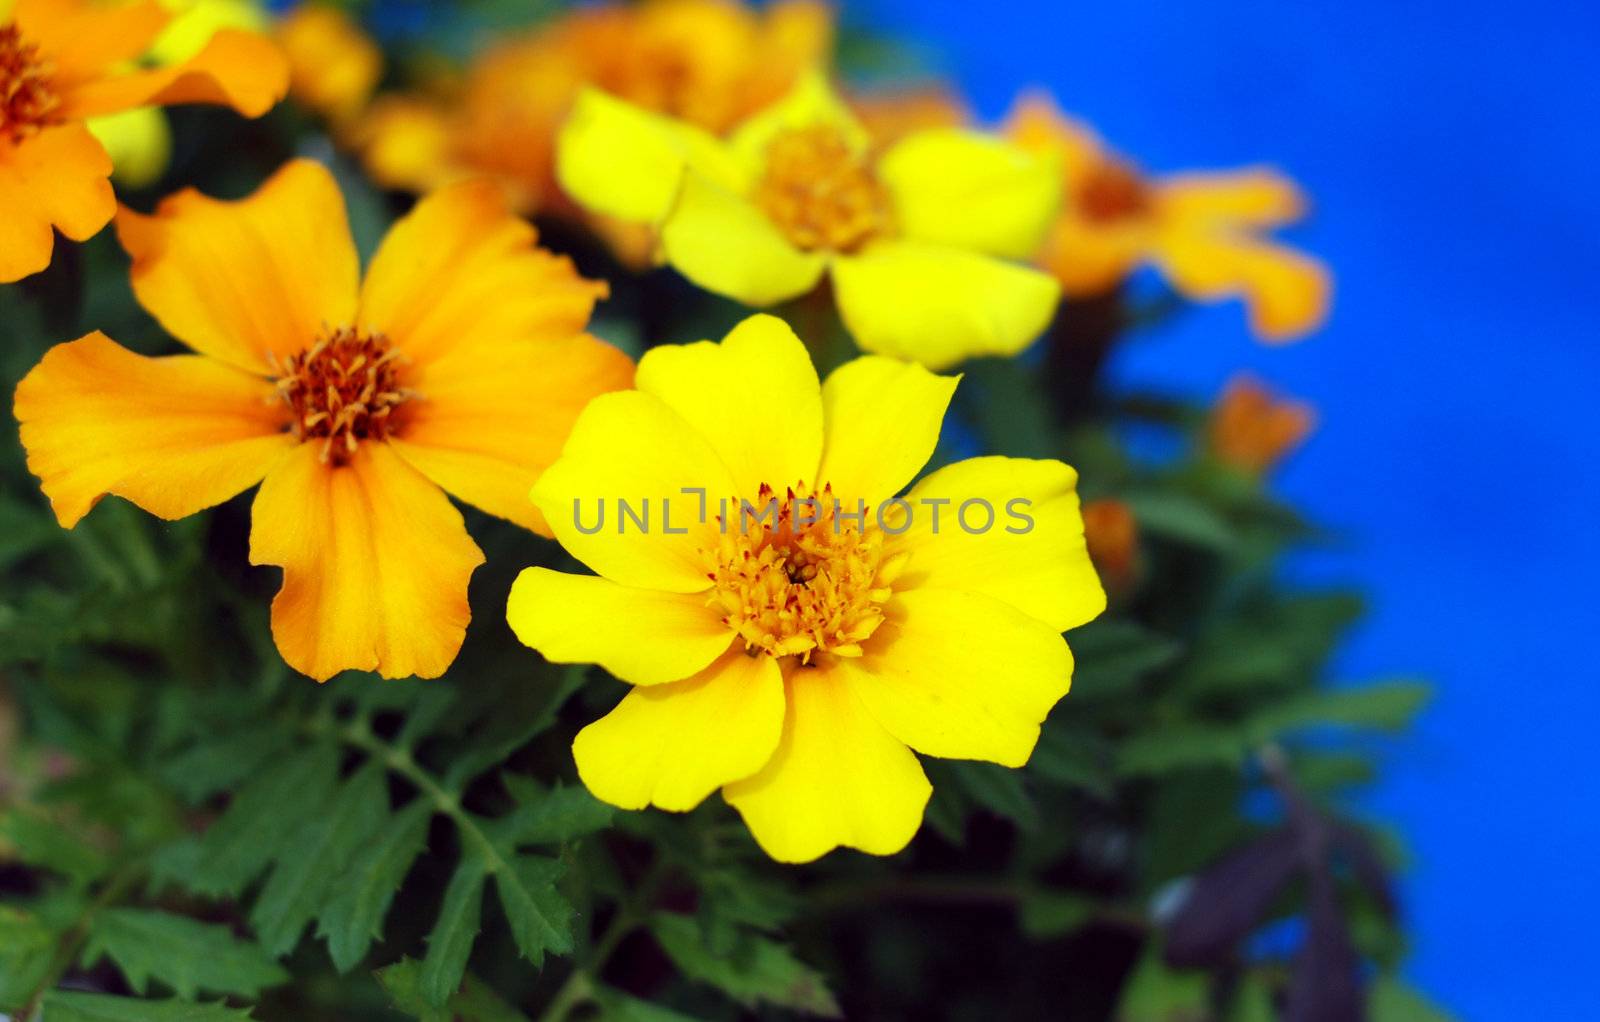 Brilliant yellow and orange marigold flowers poolside creating a vibrant color contrast